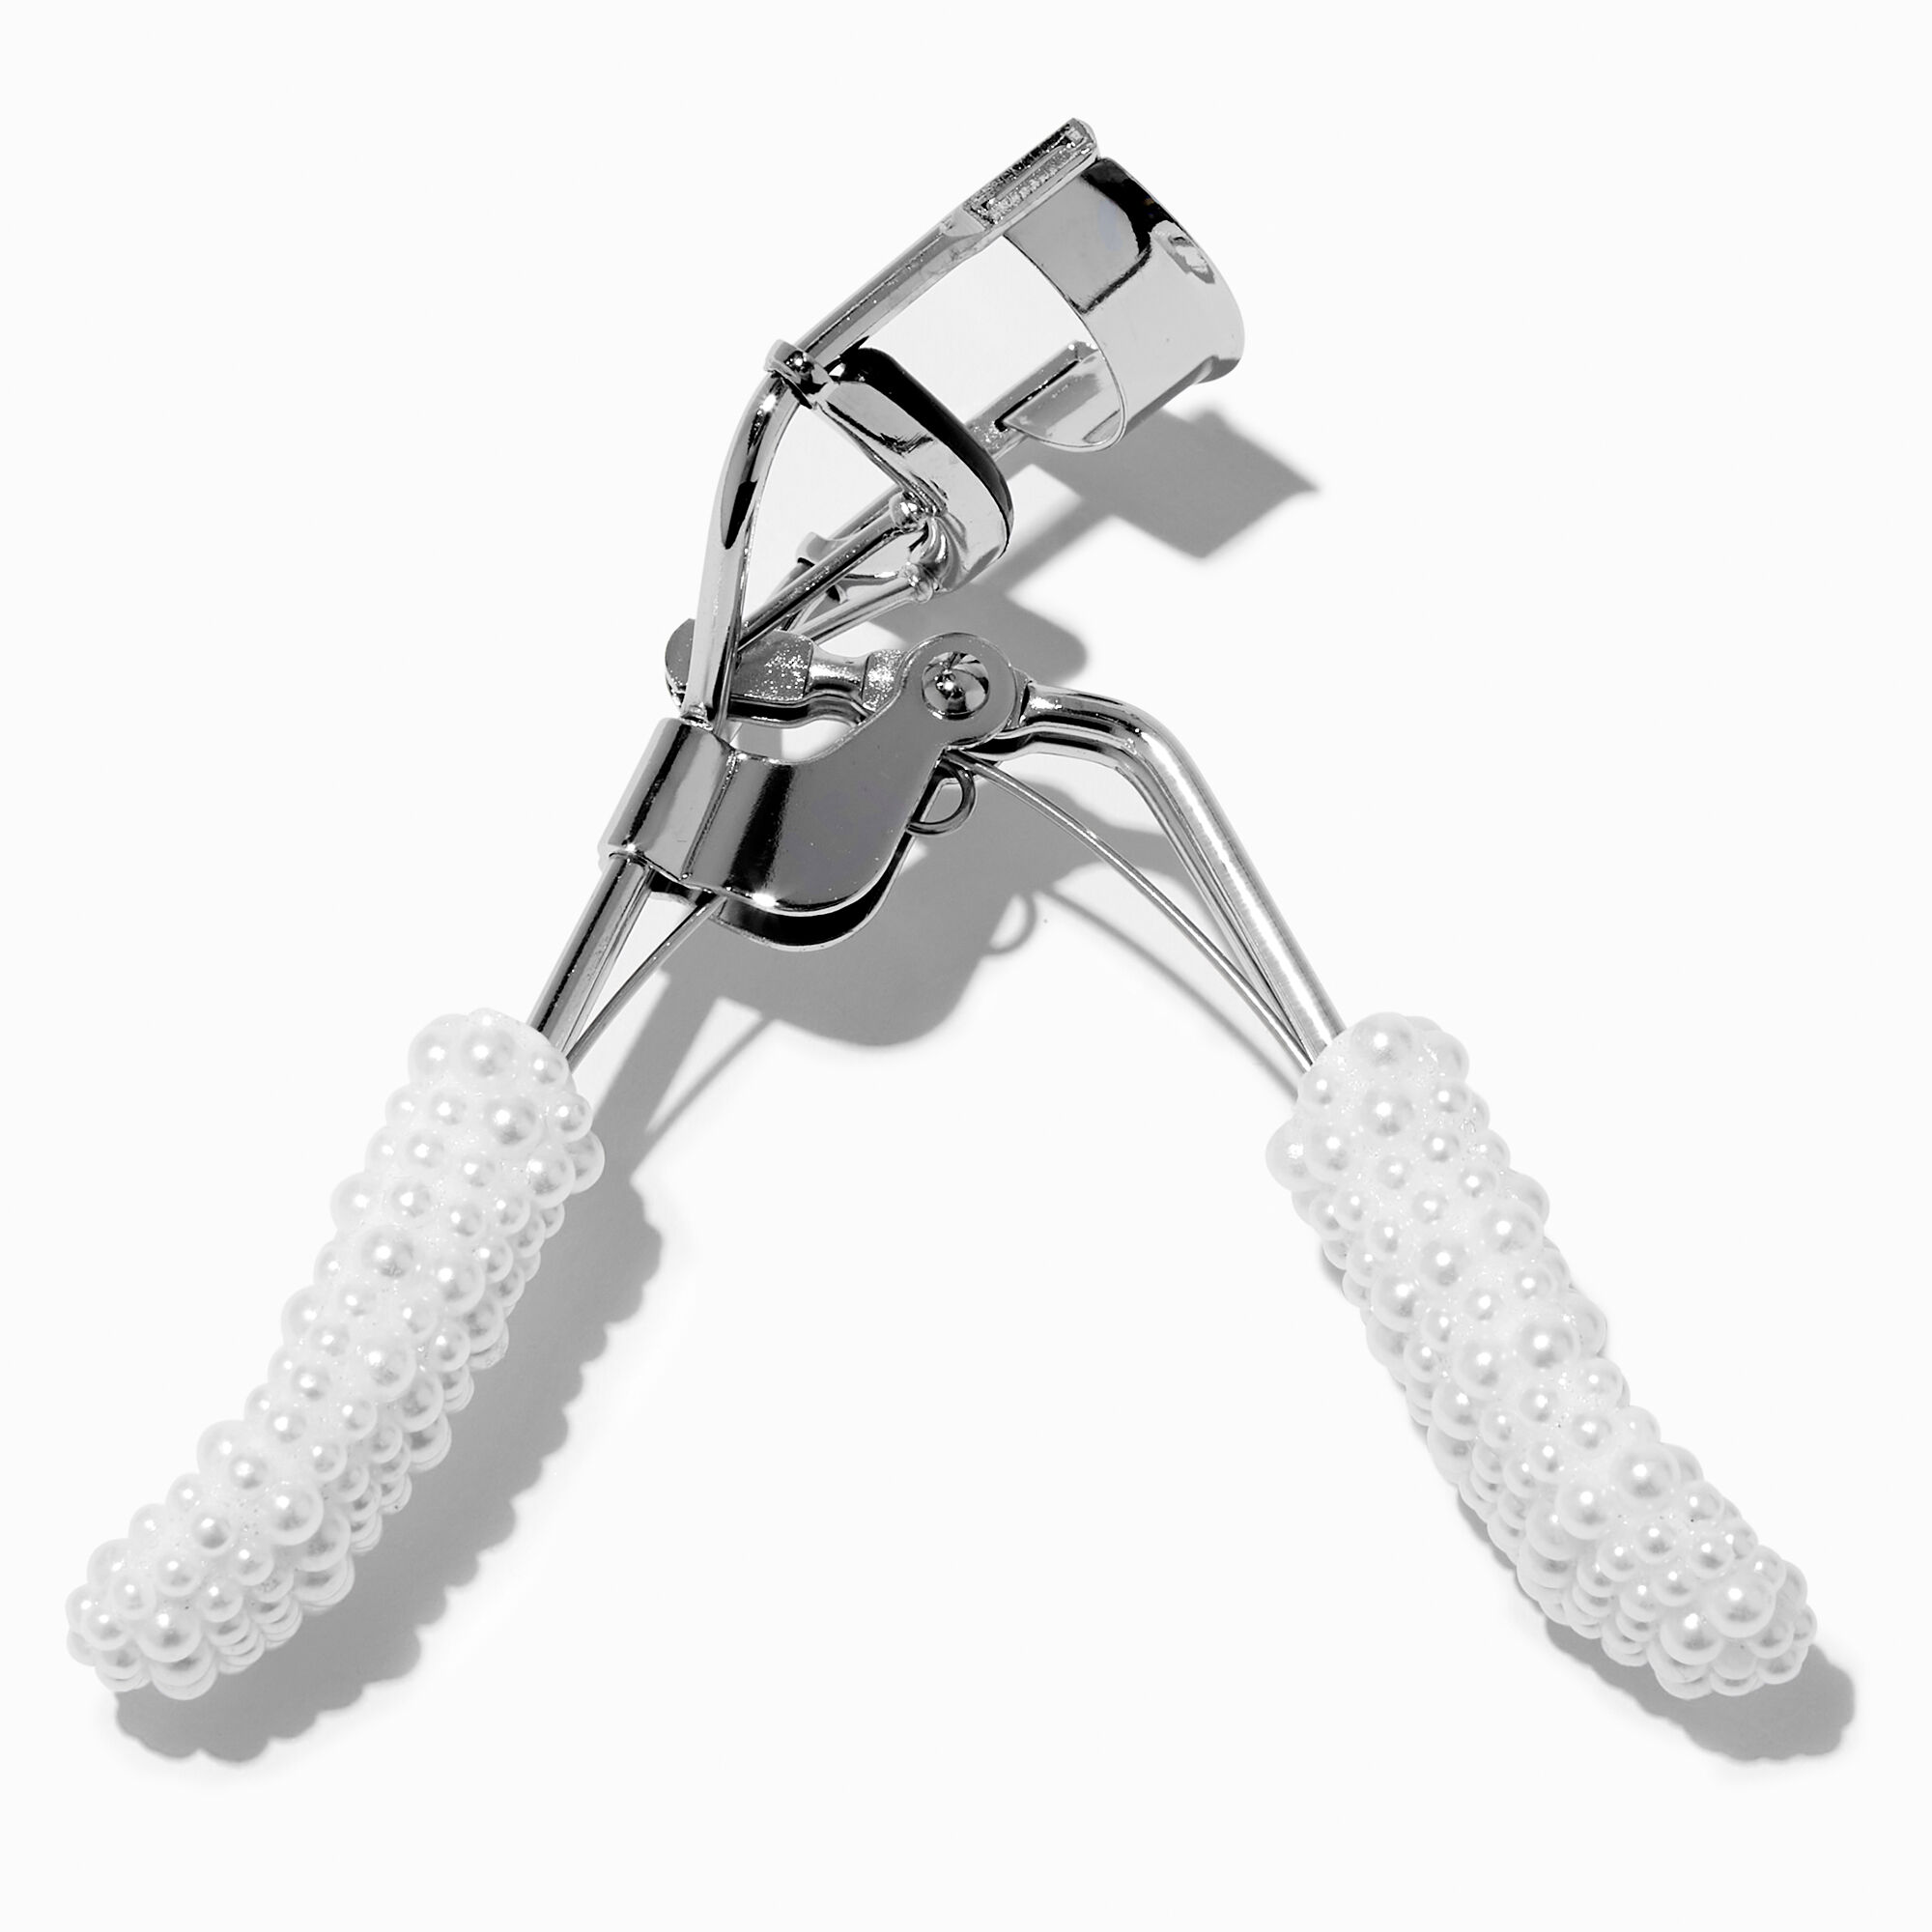 View Claires Scalloped Pearl Eyelash Curler Silver information